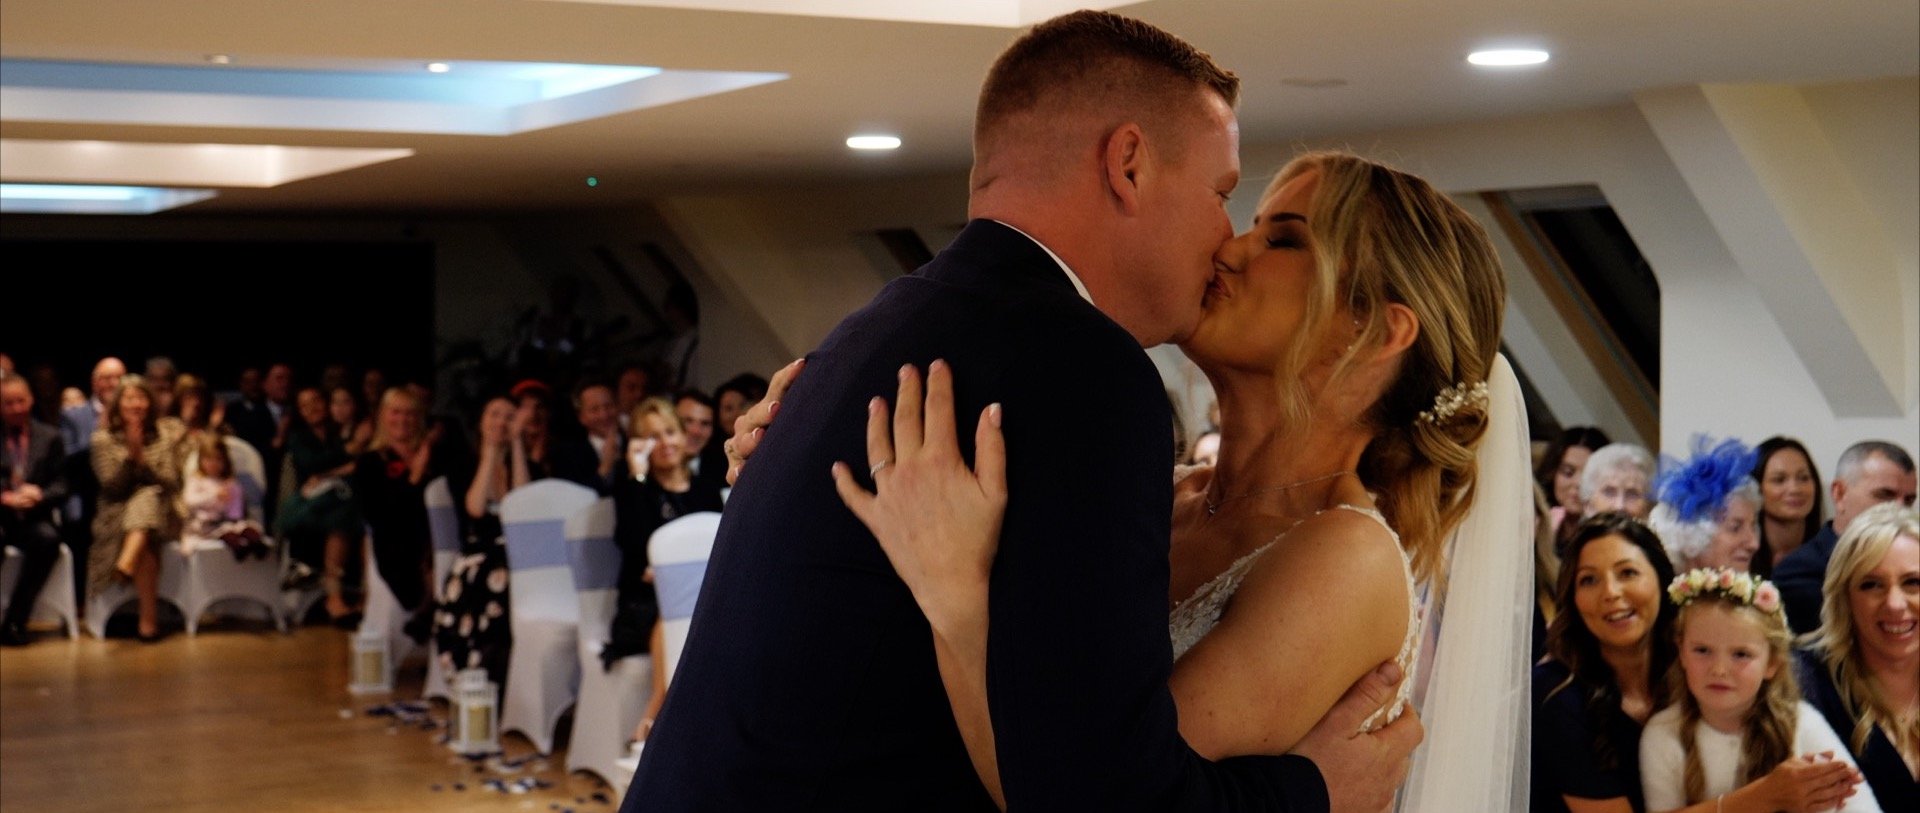 Just married at the rayleigh club essex - video.jpg